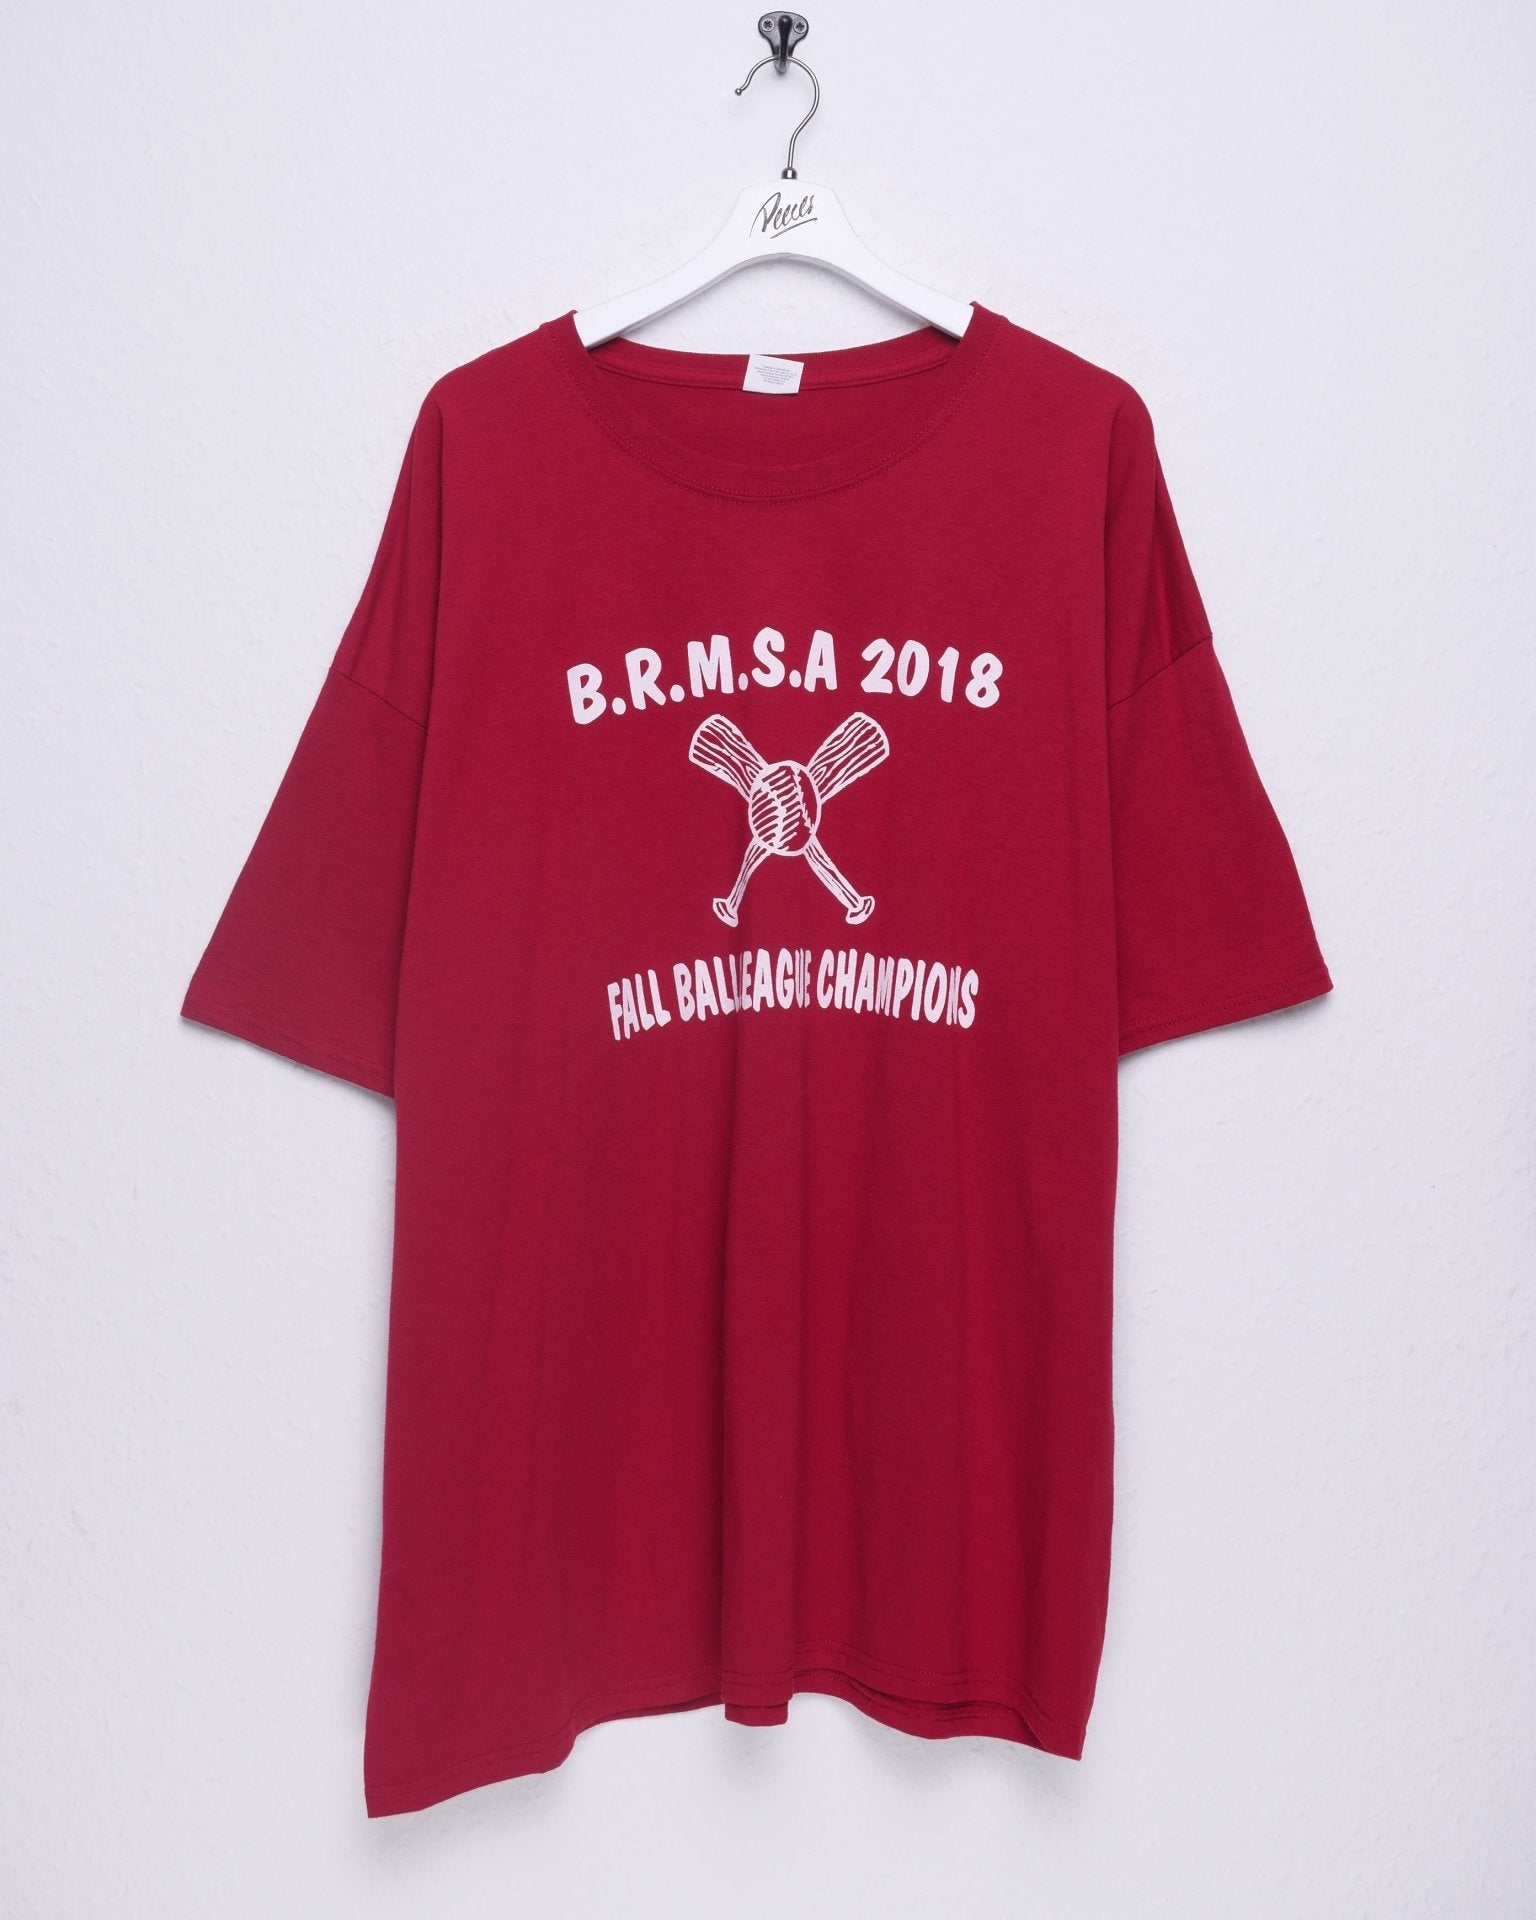 jerzees printed Logo 'Fall Ball League Champs' red oversized Shirt - Peeces